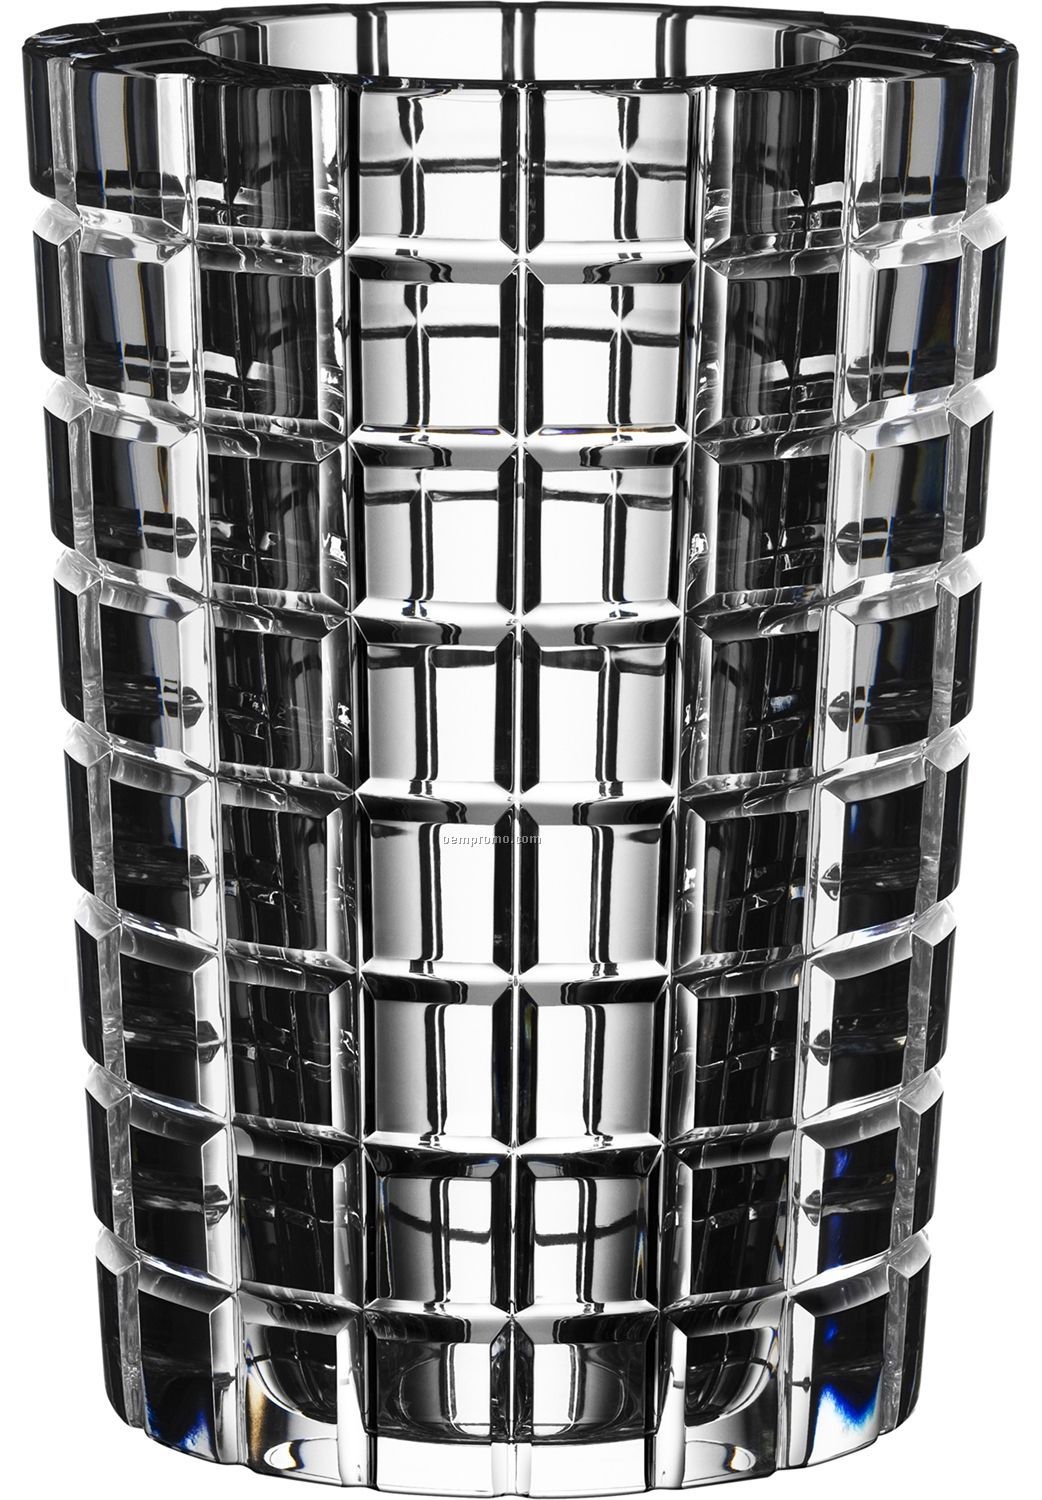 Move Crystal Vase W/ Checkered Pattern By Jan Johansson